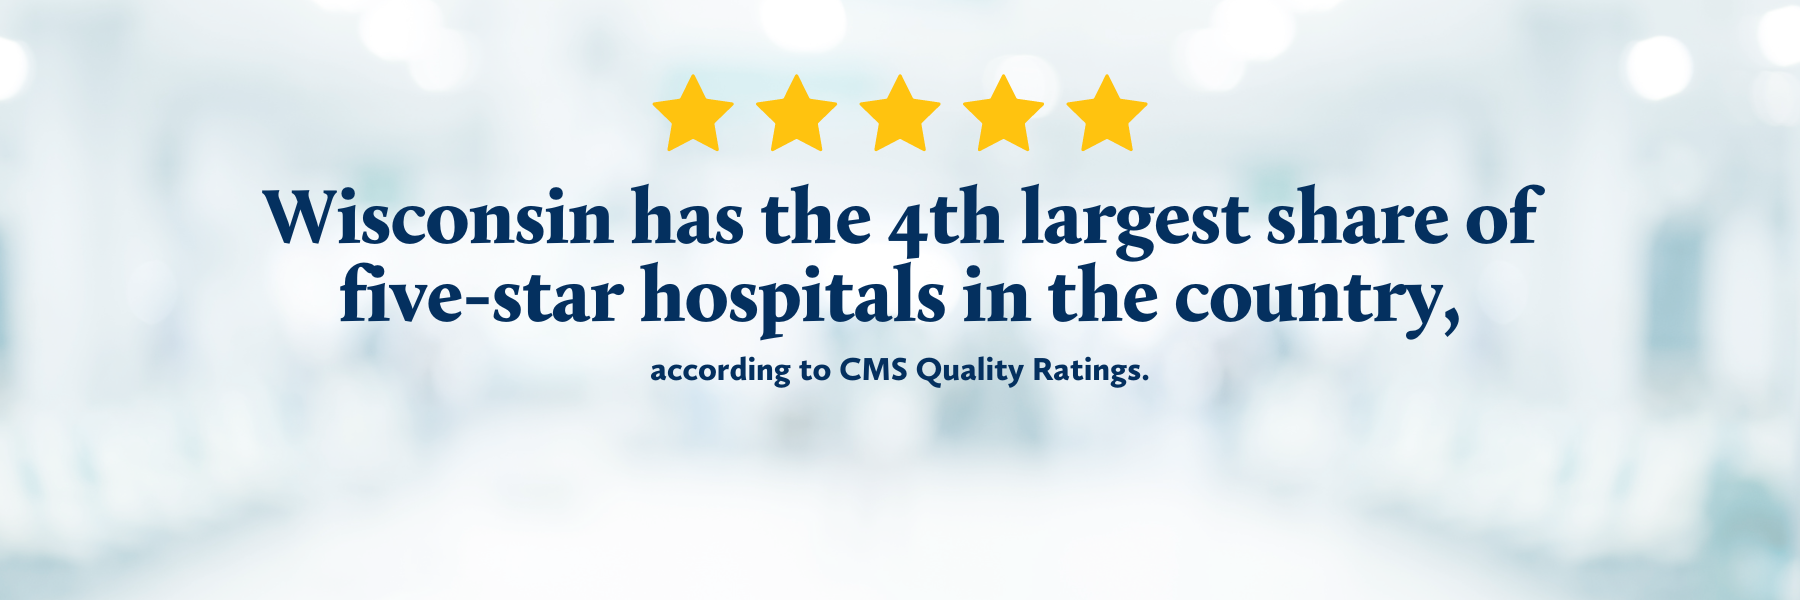 /WisconsinHospitalAssociation/media/images/Home%20Page%20Slides/Wisconsin-Hospitals-5-Star-CMS-Quality-Ratings.png?ext=.png